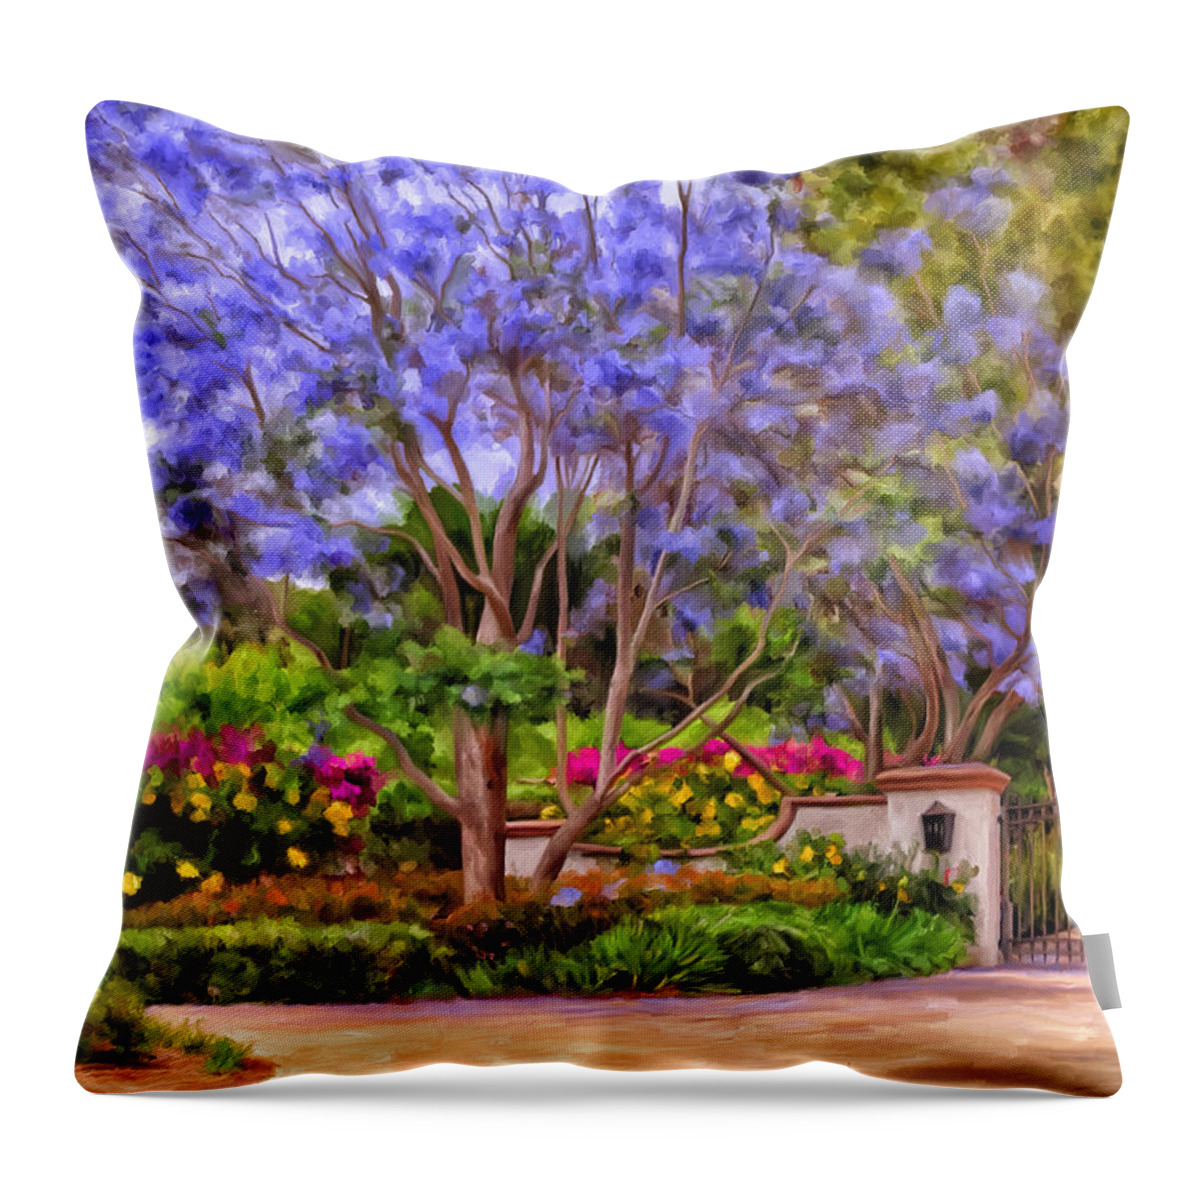 Landscape Throw Pillow featuring the painting The Jacaranda by Michael Pickett